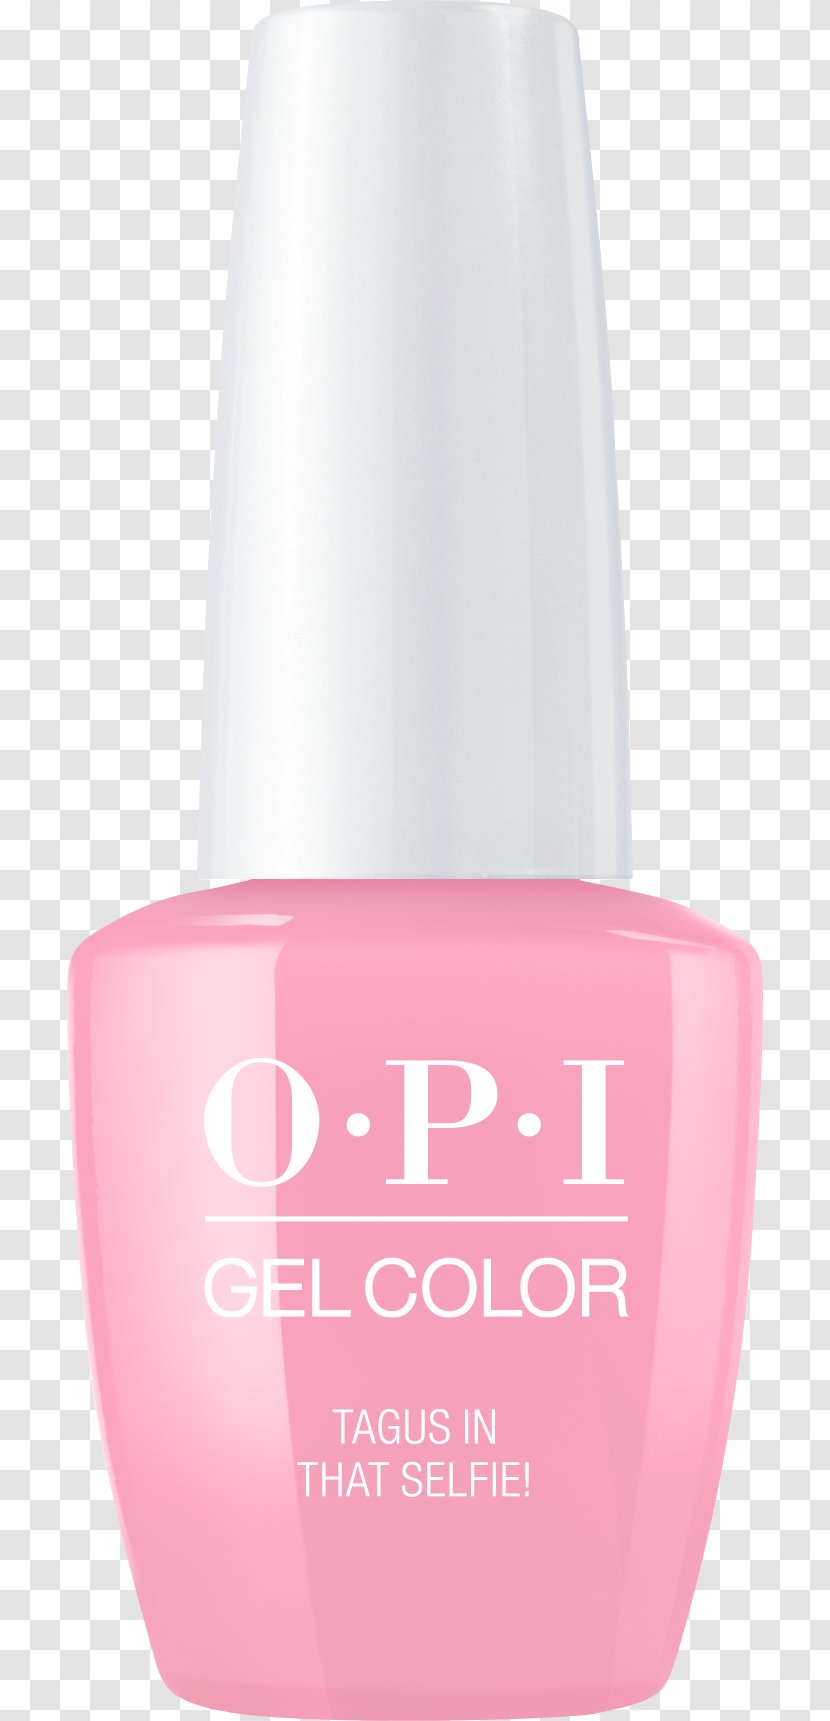 OPI Products GelColor Gel Nails Nail Polish - Color Transparent PNG